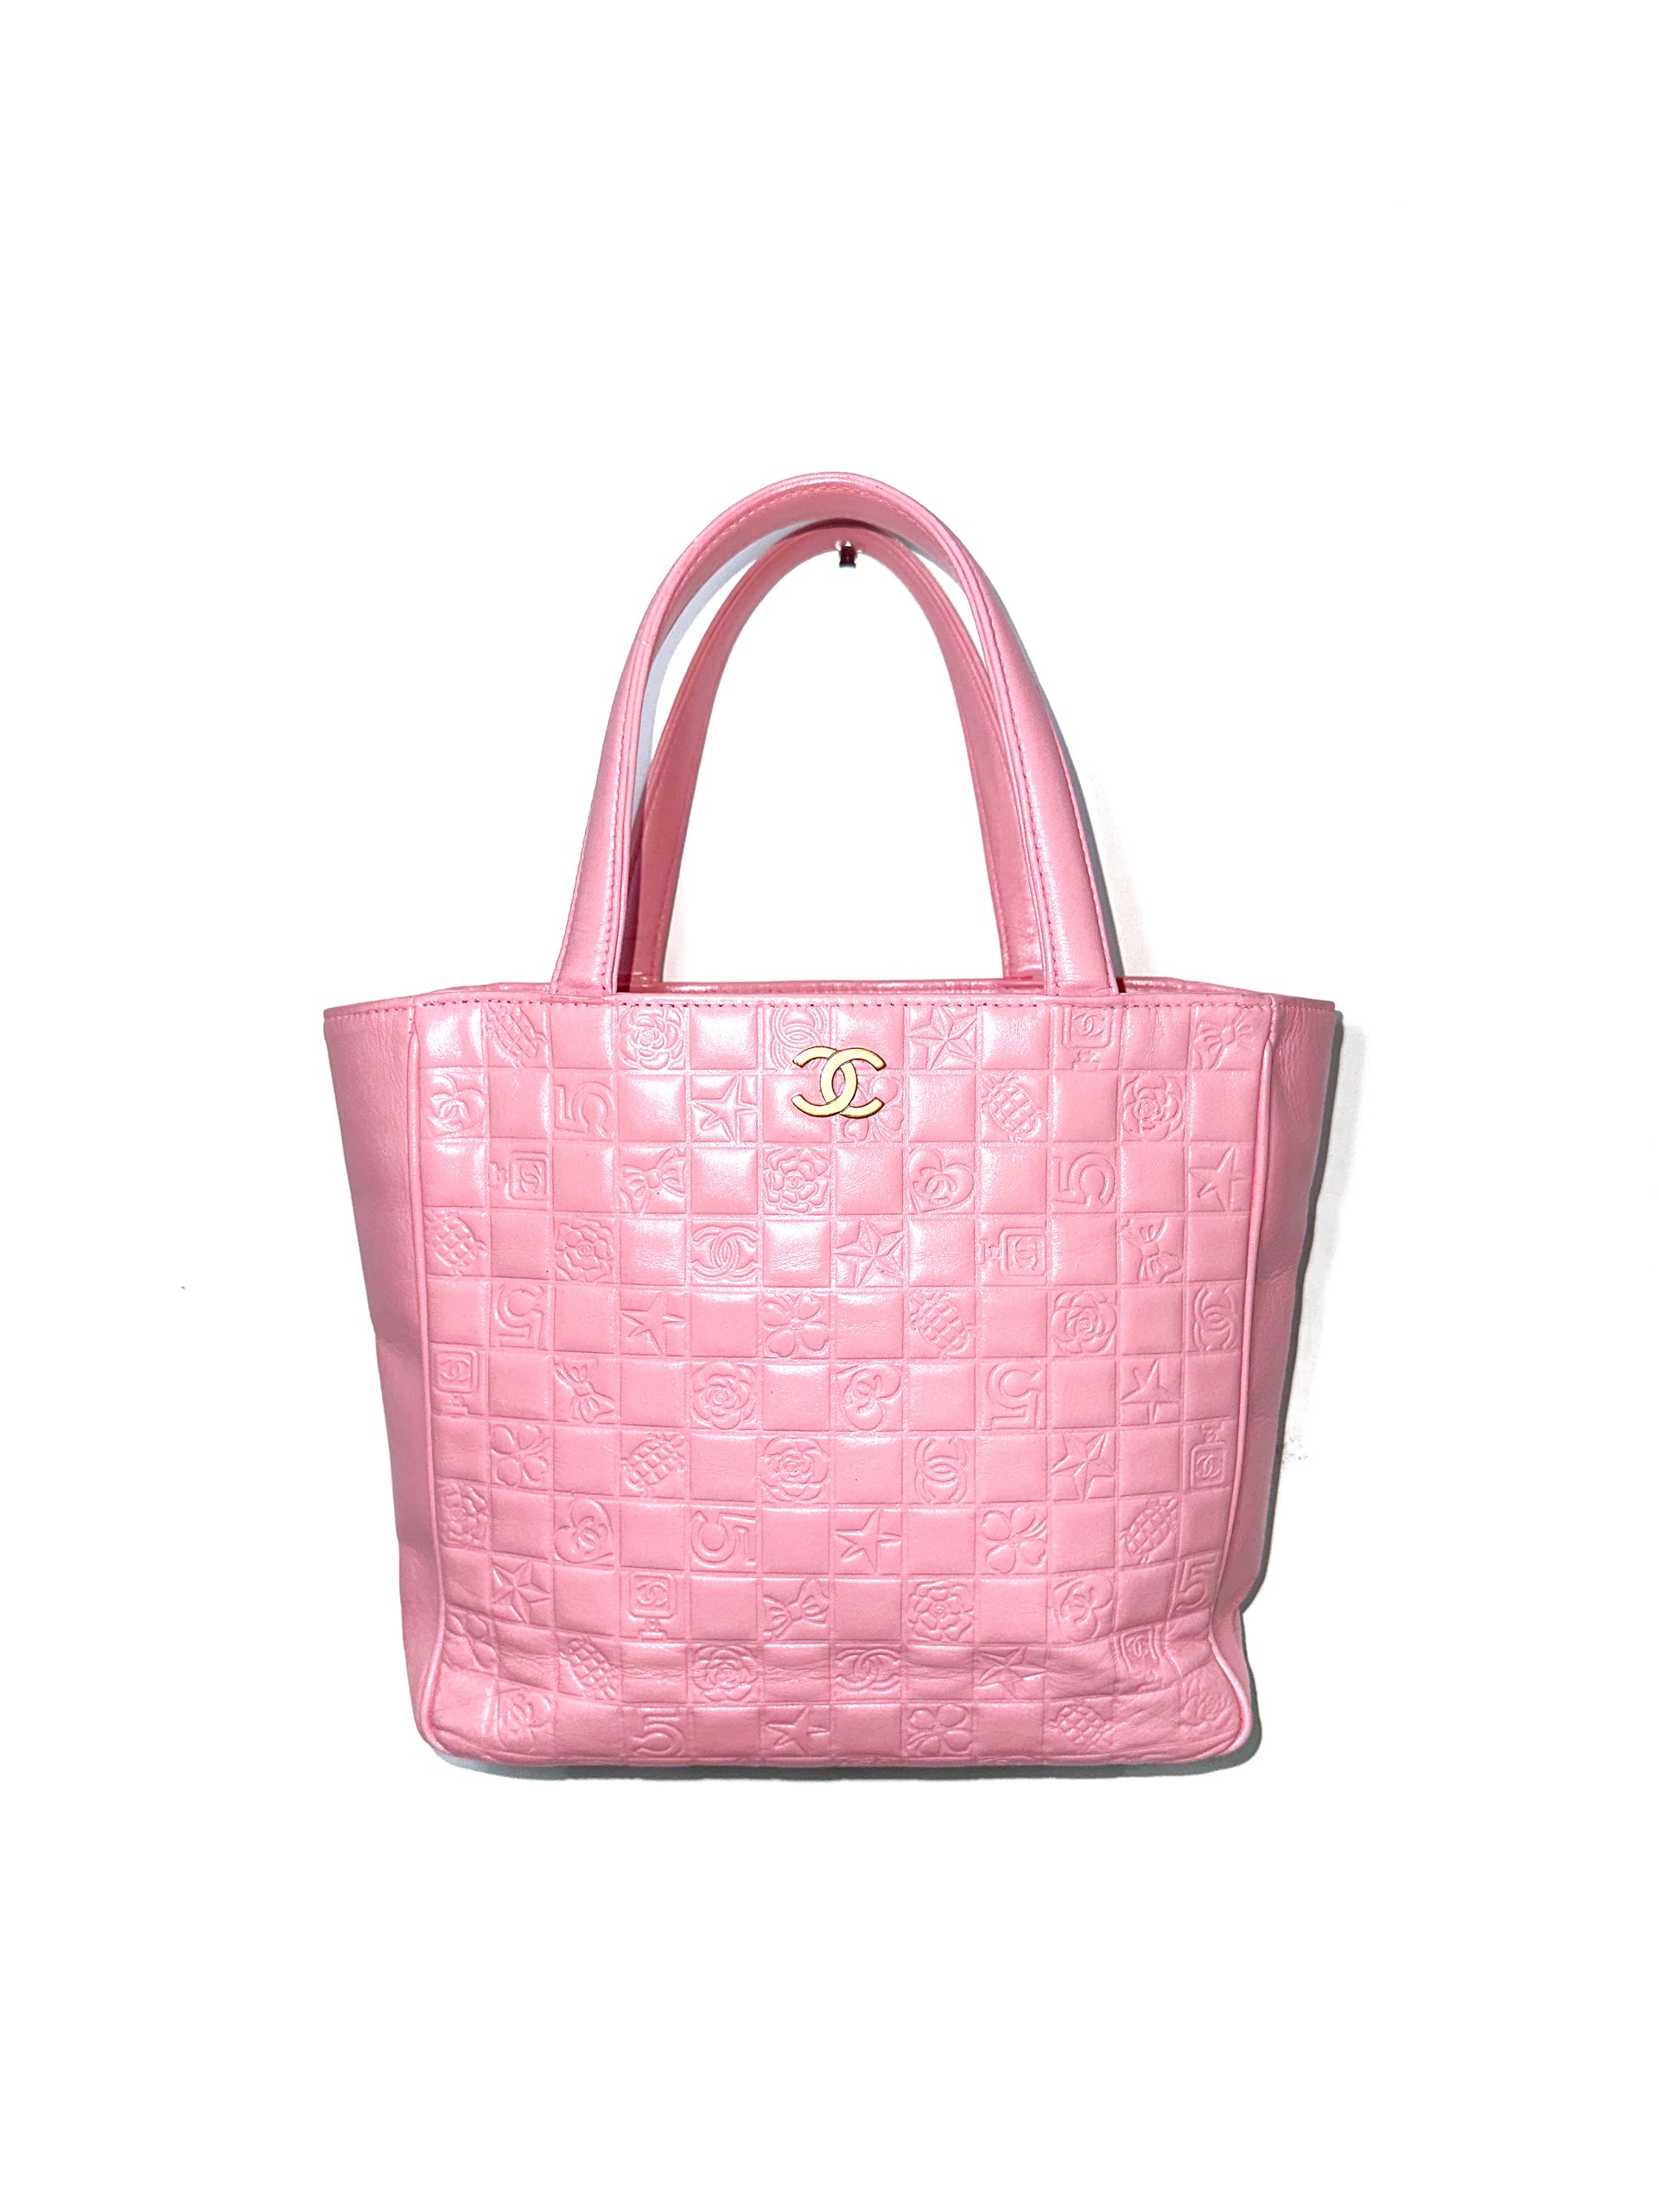 Pink Chanel Bags - 31 For Sale on 1stDibs  pink chanel tote, pink chanel  bag price, chanel vintage pink bag